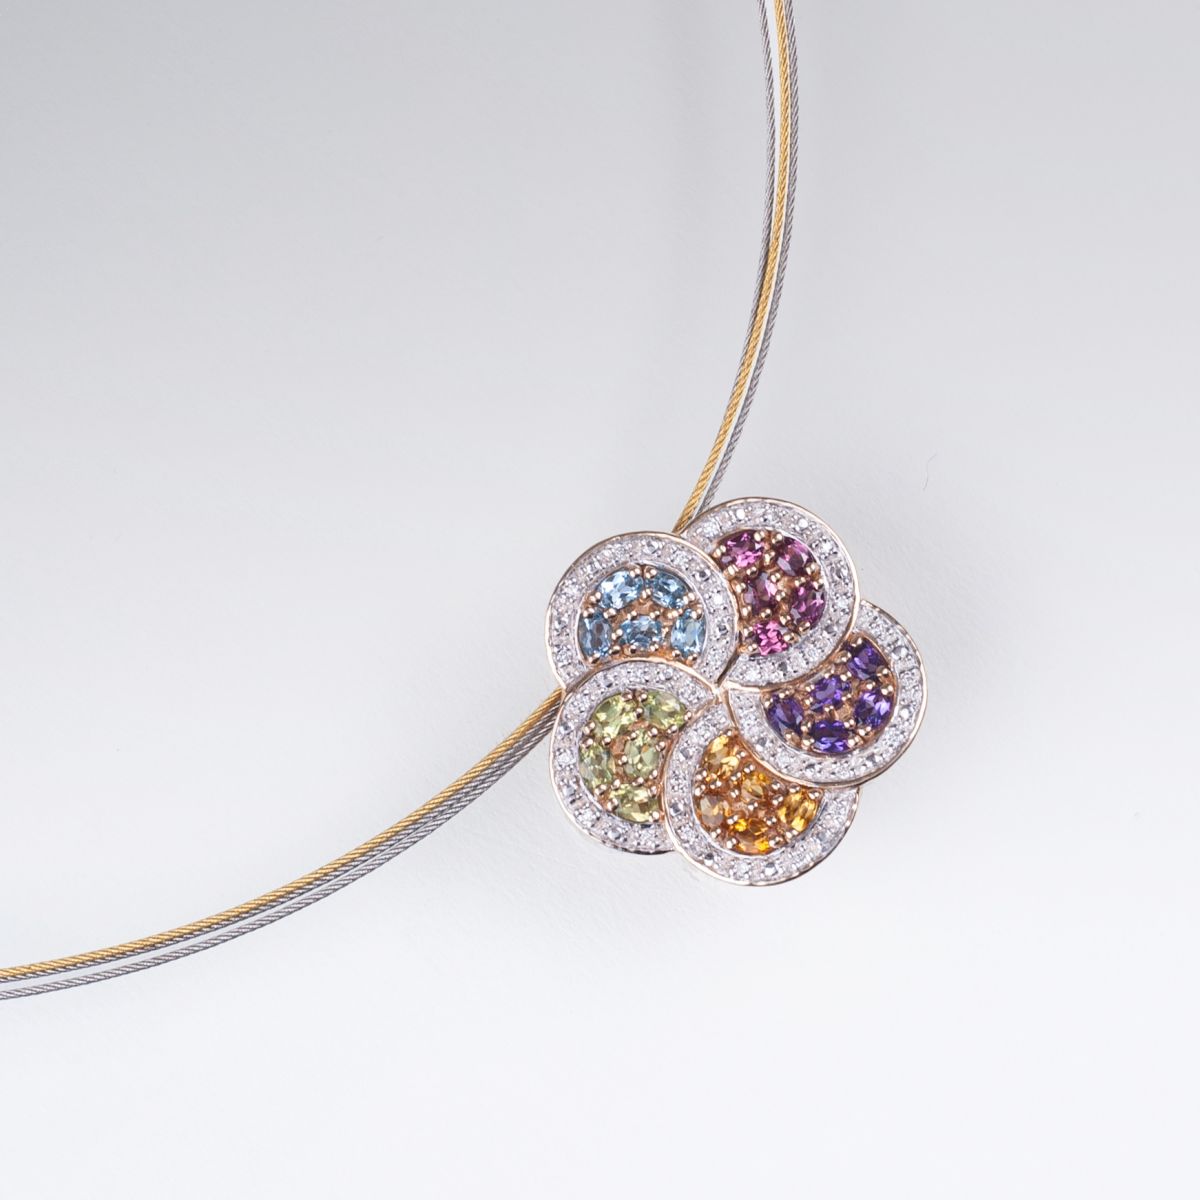 A gemstone pendant 'Flower' with necklace